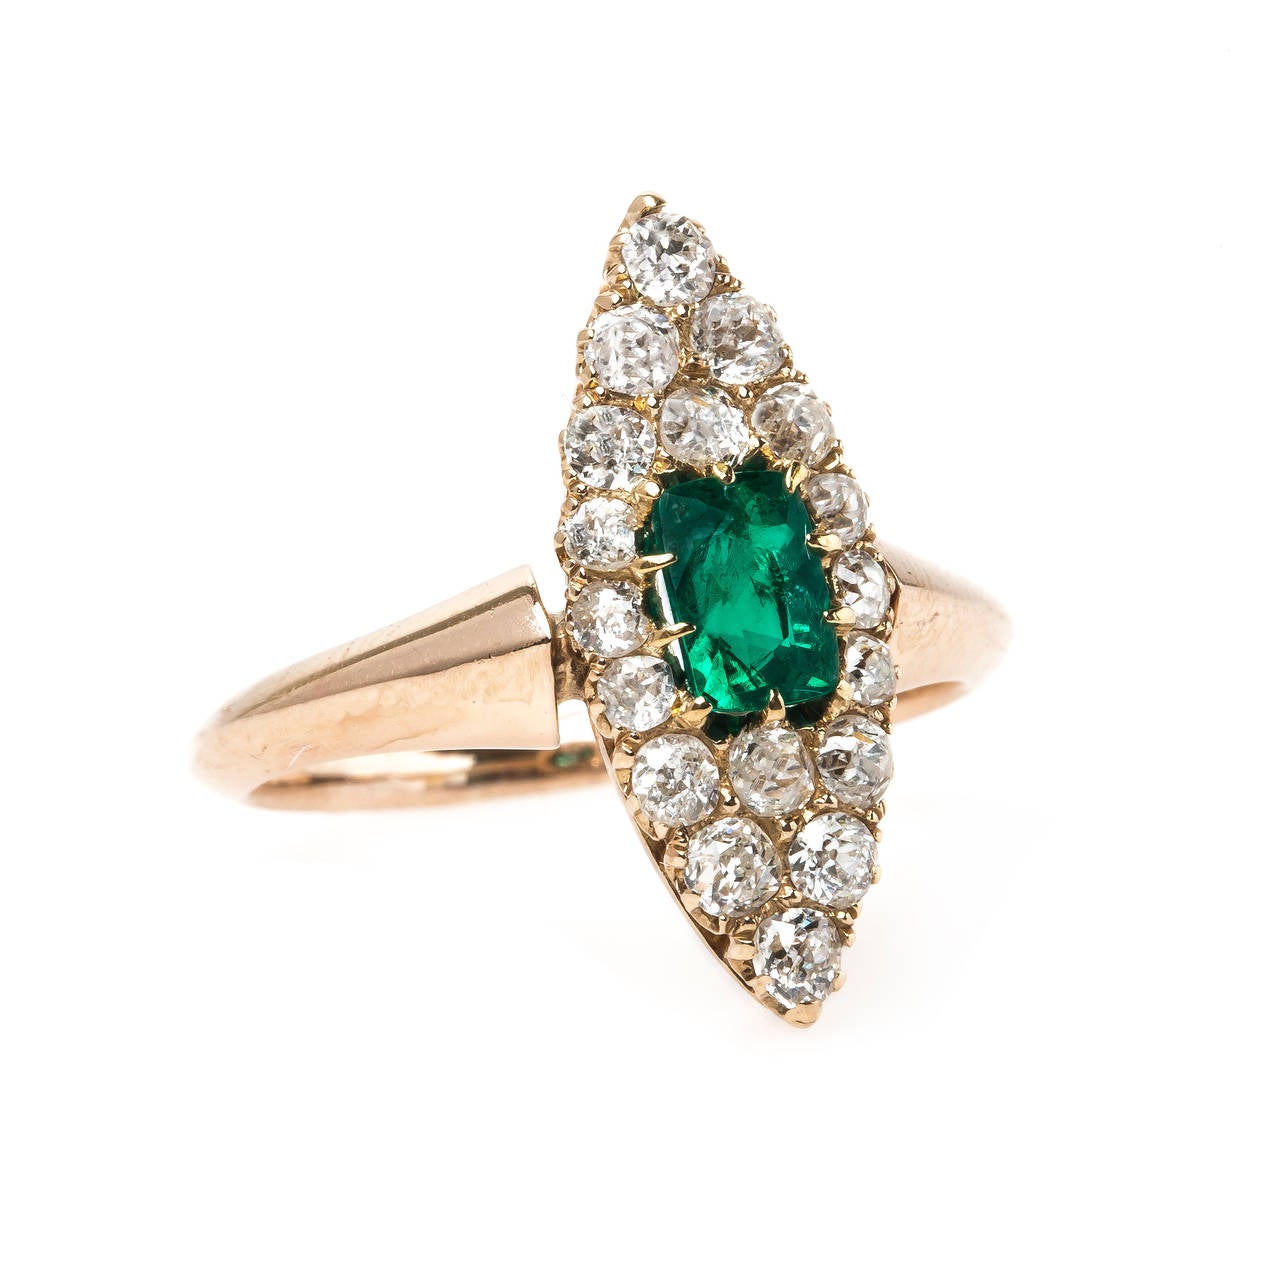 Holly Hill is a striking authentic Victorian era (circa 1890) navette style ring made from 14k rose gold centering a single Rectangular Cushion Cut emerald, ten-prong set, accompanied with a Guild Laboratories certificate stating the emerald is